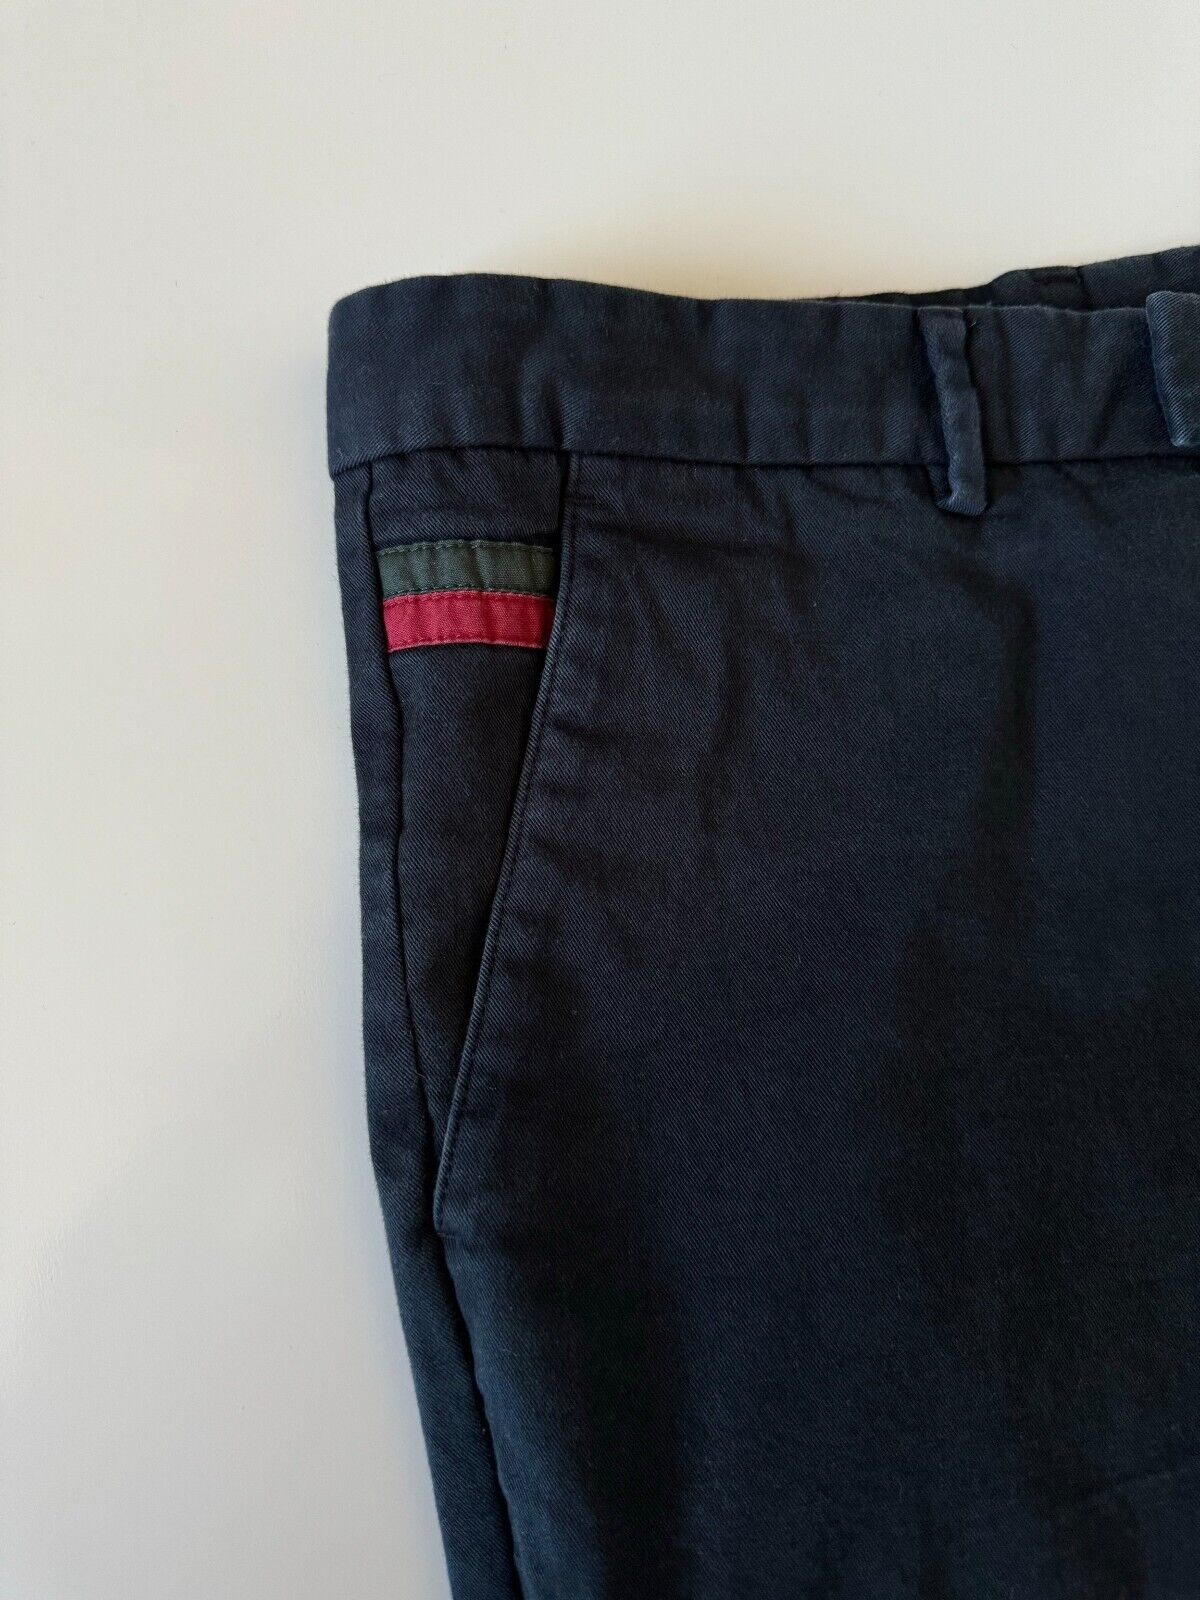 Gucci Men’s Blue Tight Fit Dress Pants Size 32 US Made in Italy